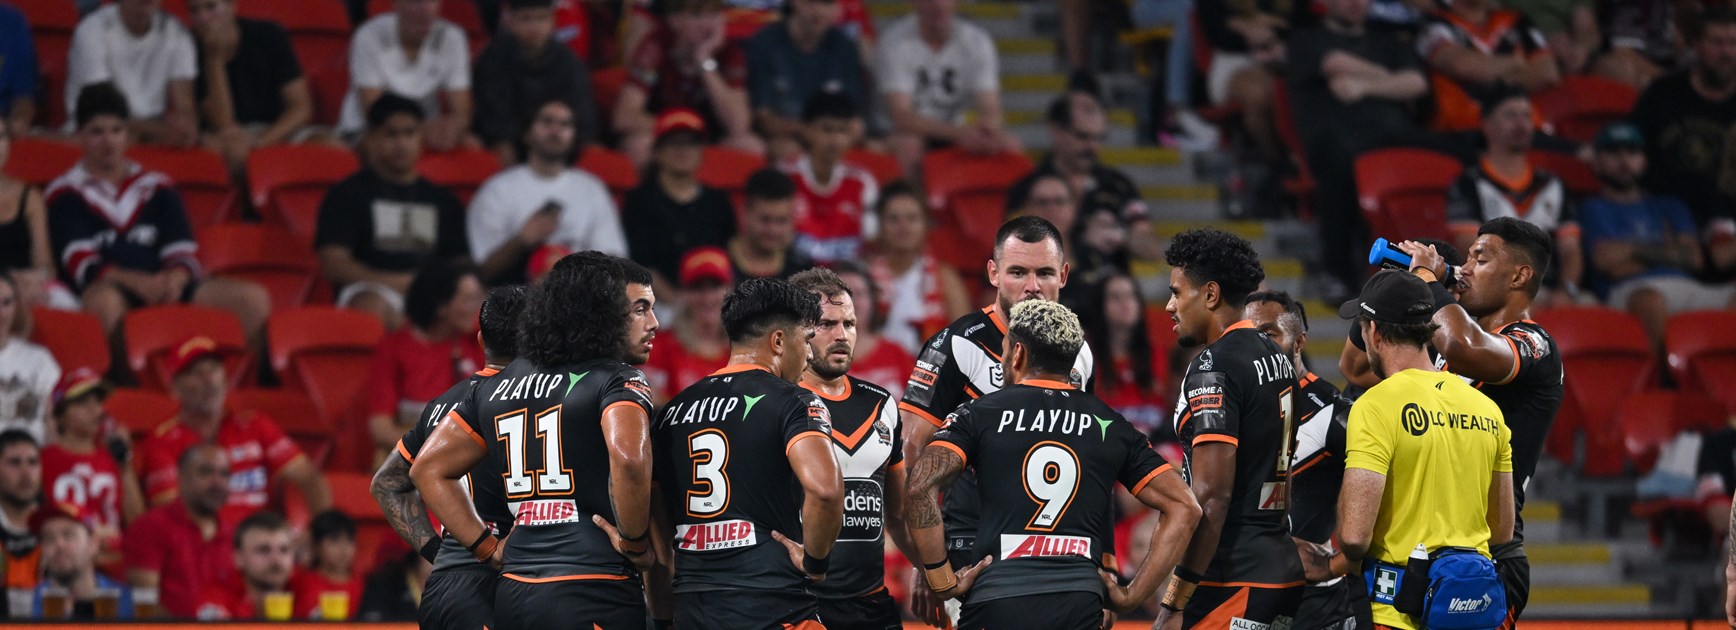 Match Report: Round 5 vs Dolphins